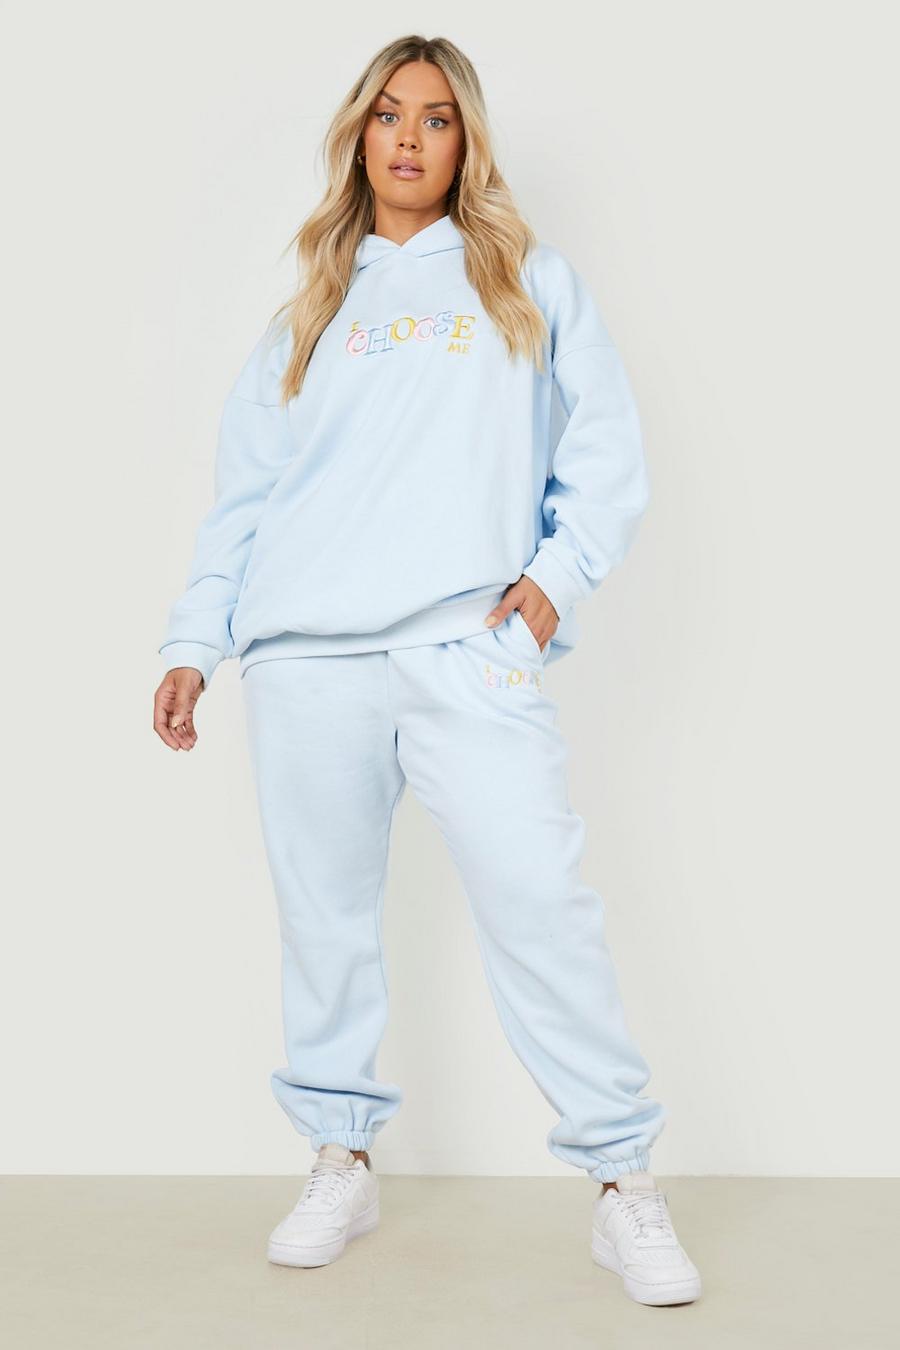 Baby blue Plus 'I Choose Me' Embroidered Hooded Tracksuit